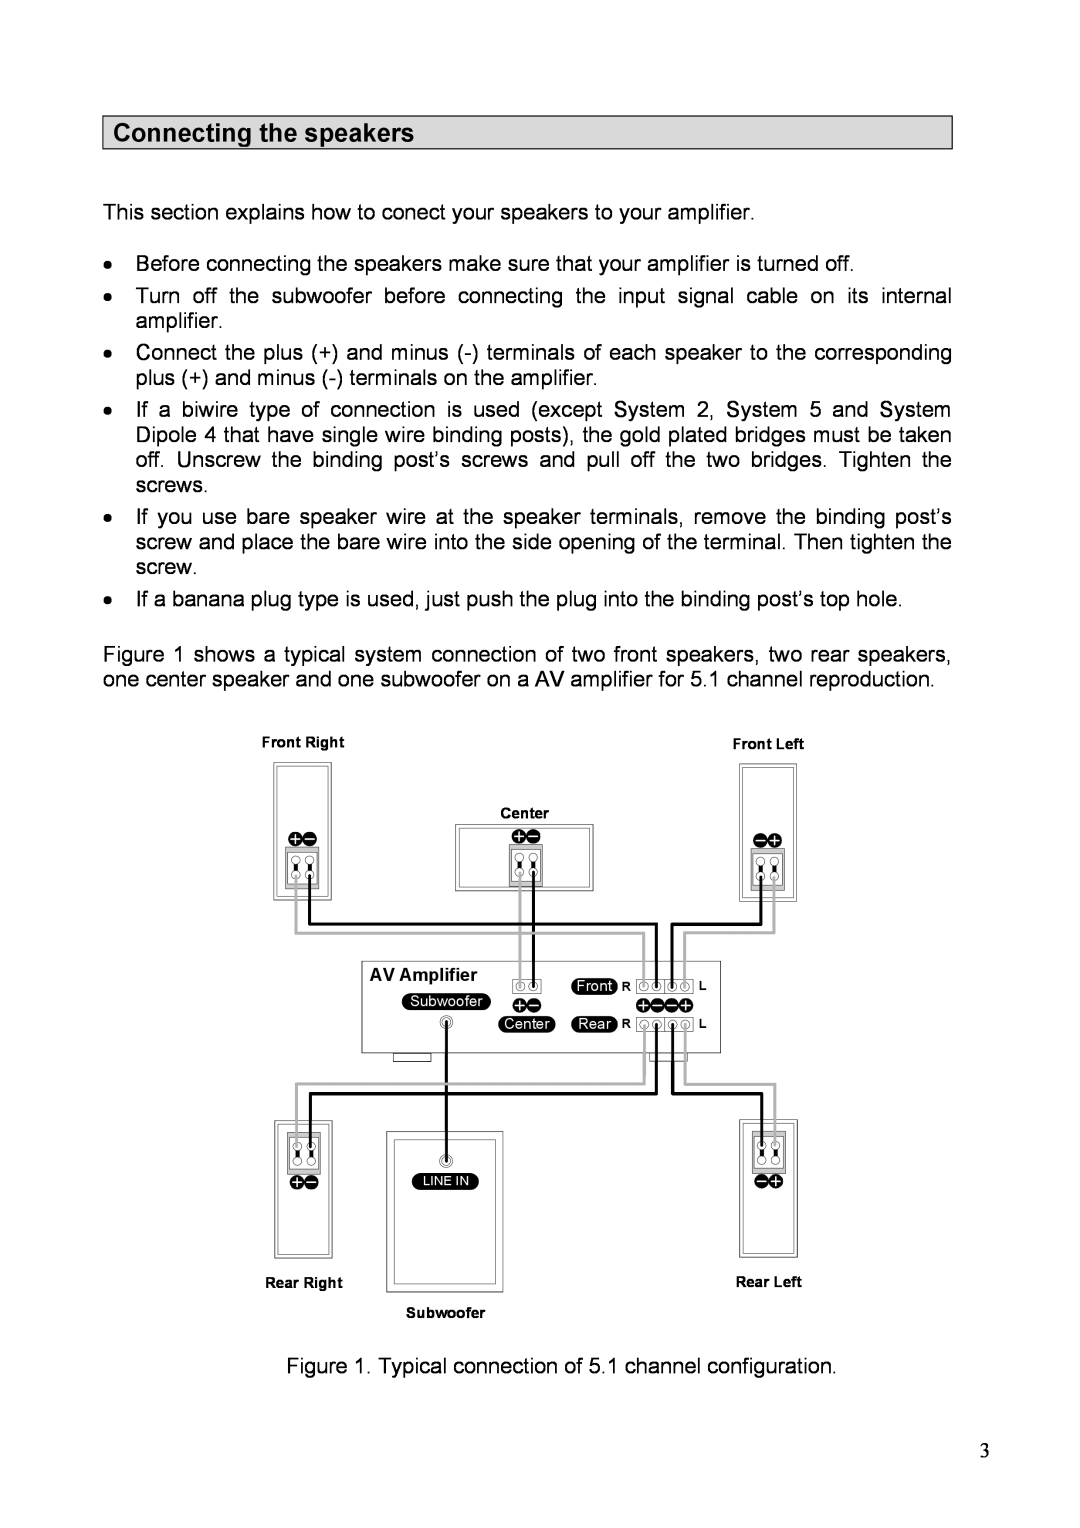 Crystal Audiovideo System Series operating instructions Connecting the speakers, AV Amplifier 